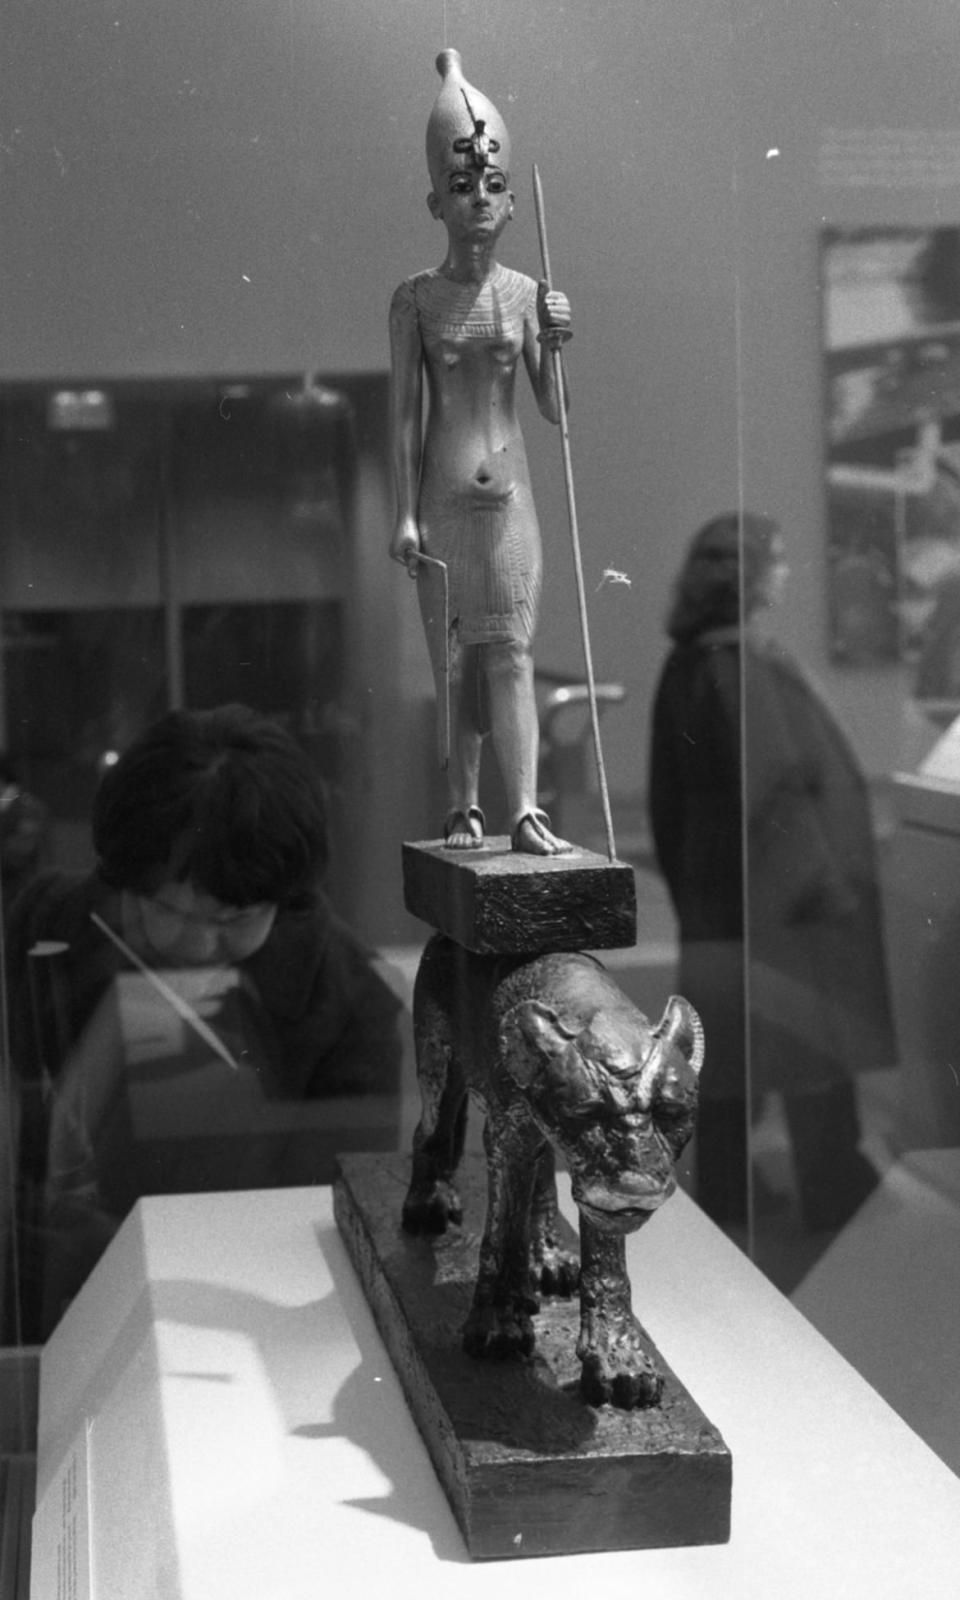 <div class="inline-image__caption"><p>A statuette of Tutankhamun standing on a panther.</p></div> <div class="inline-image__credit">Dick Lewis/New York Daily News via Getty</div>